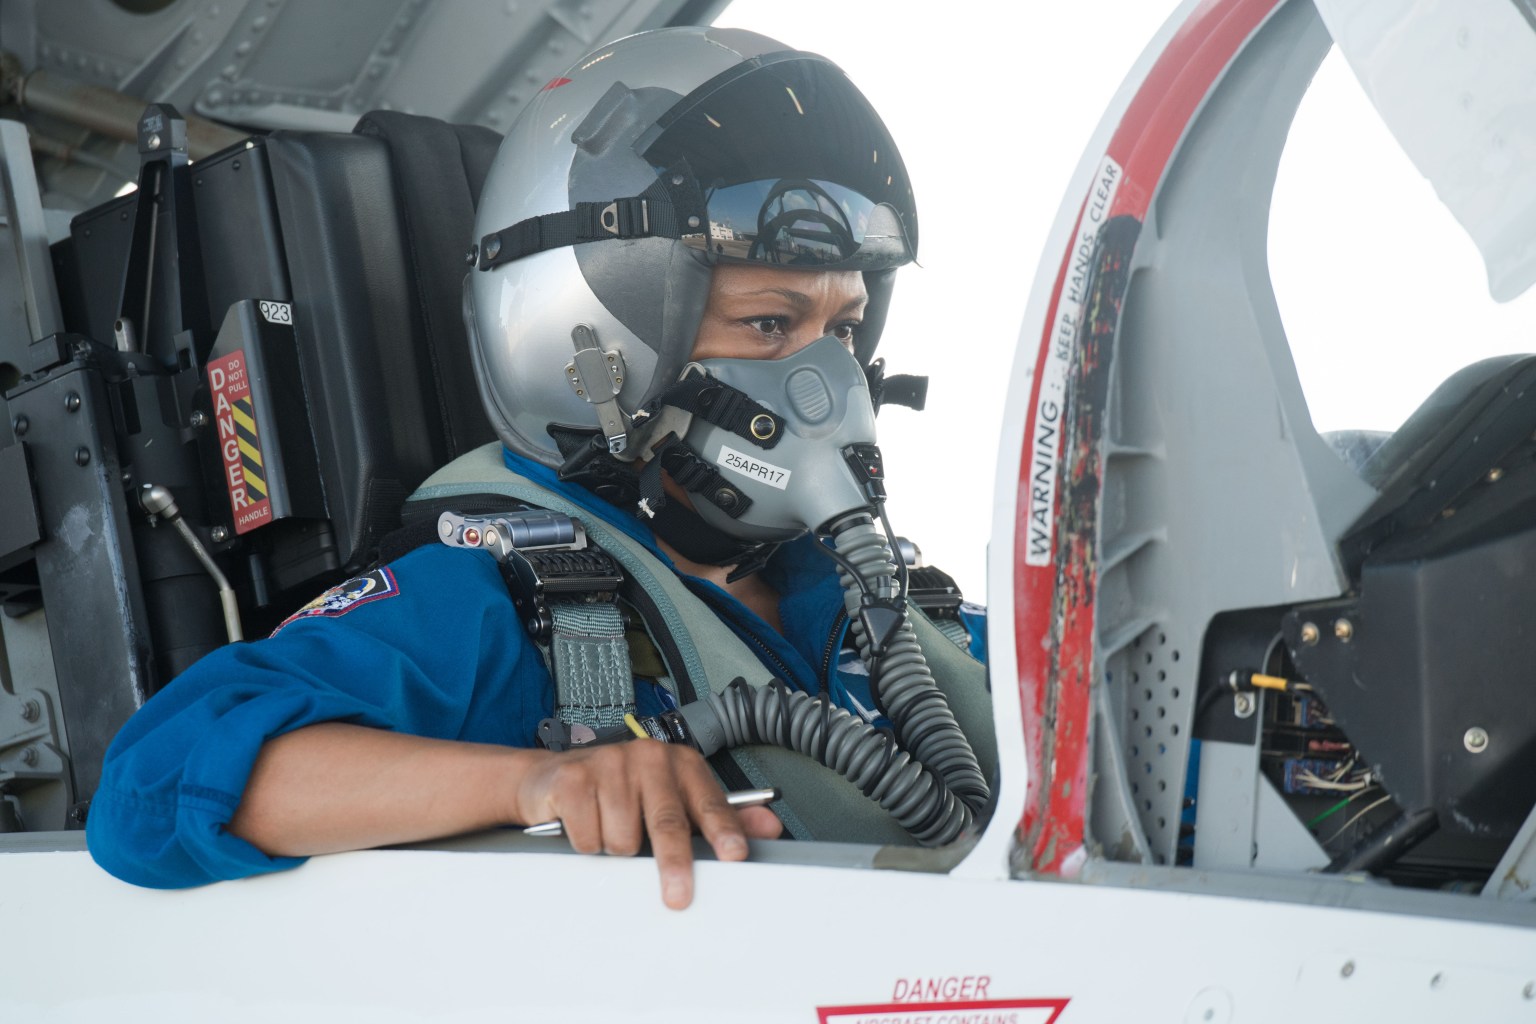  Jeanette Epps during T-38 preparations, walking out to aircraft and in backseat